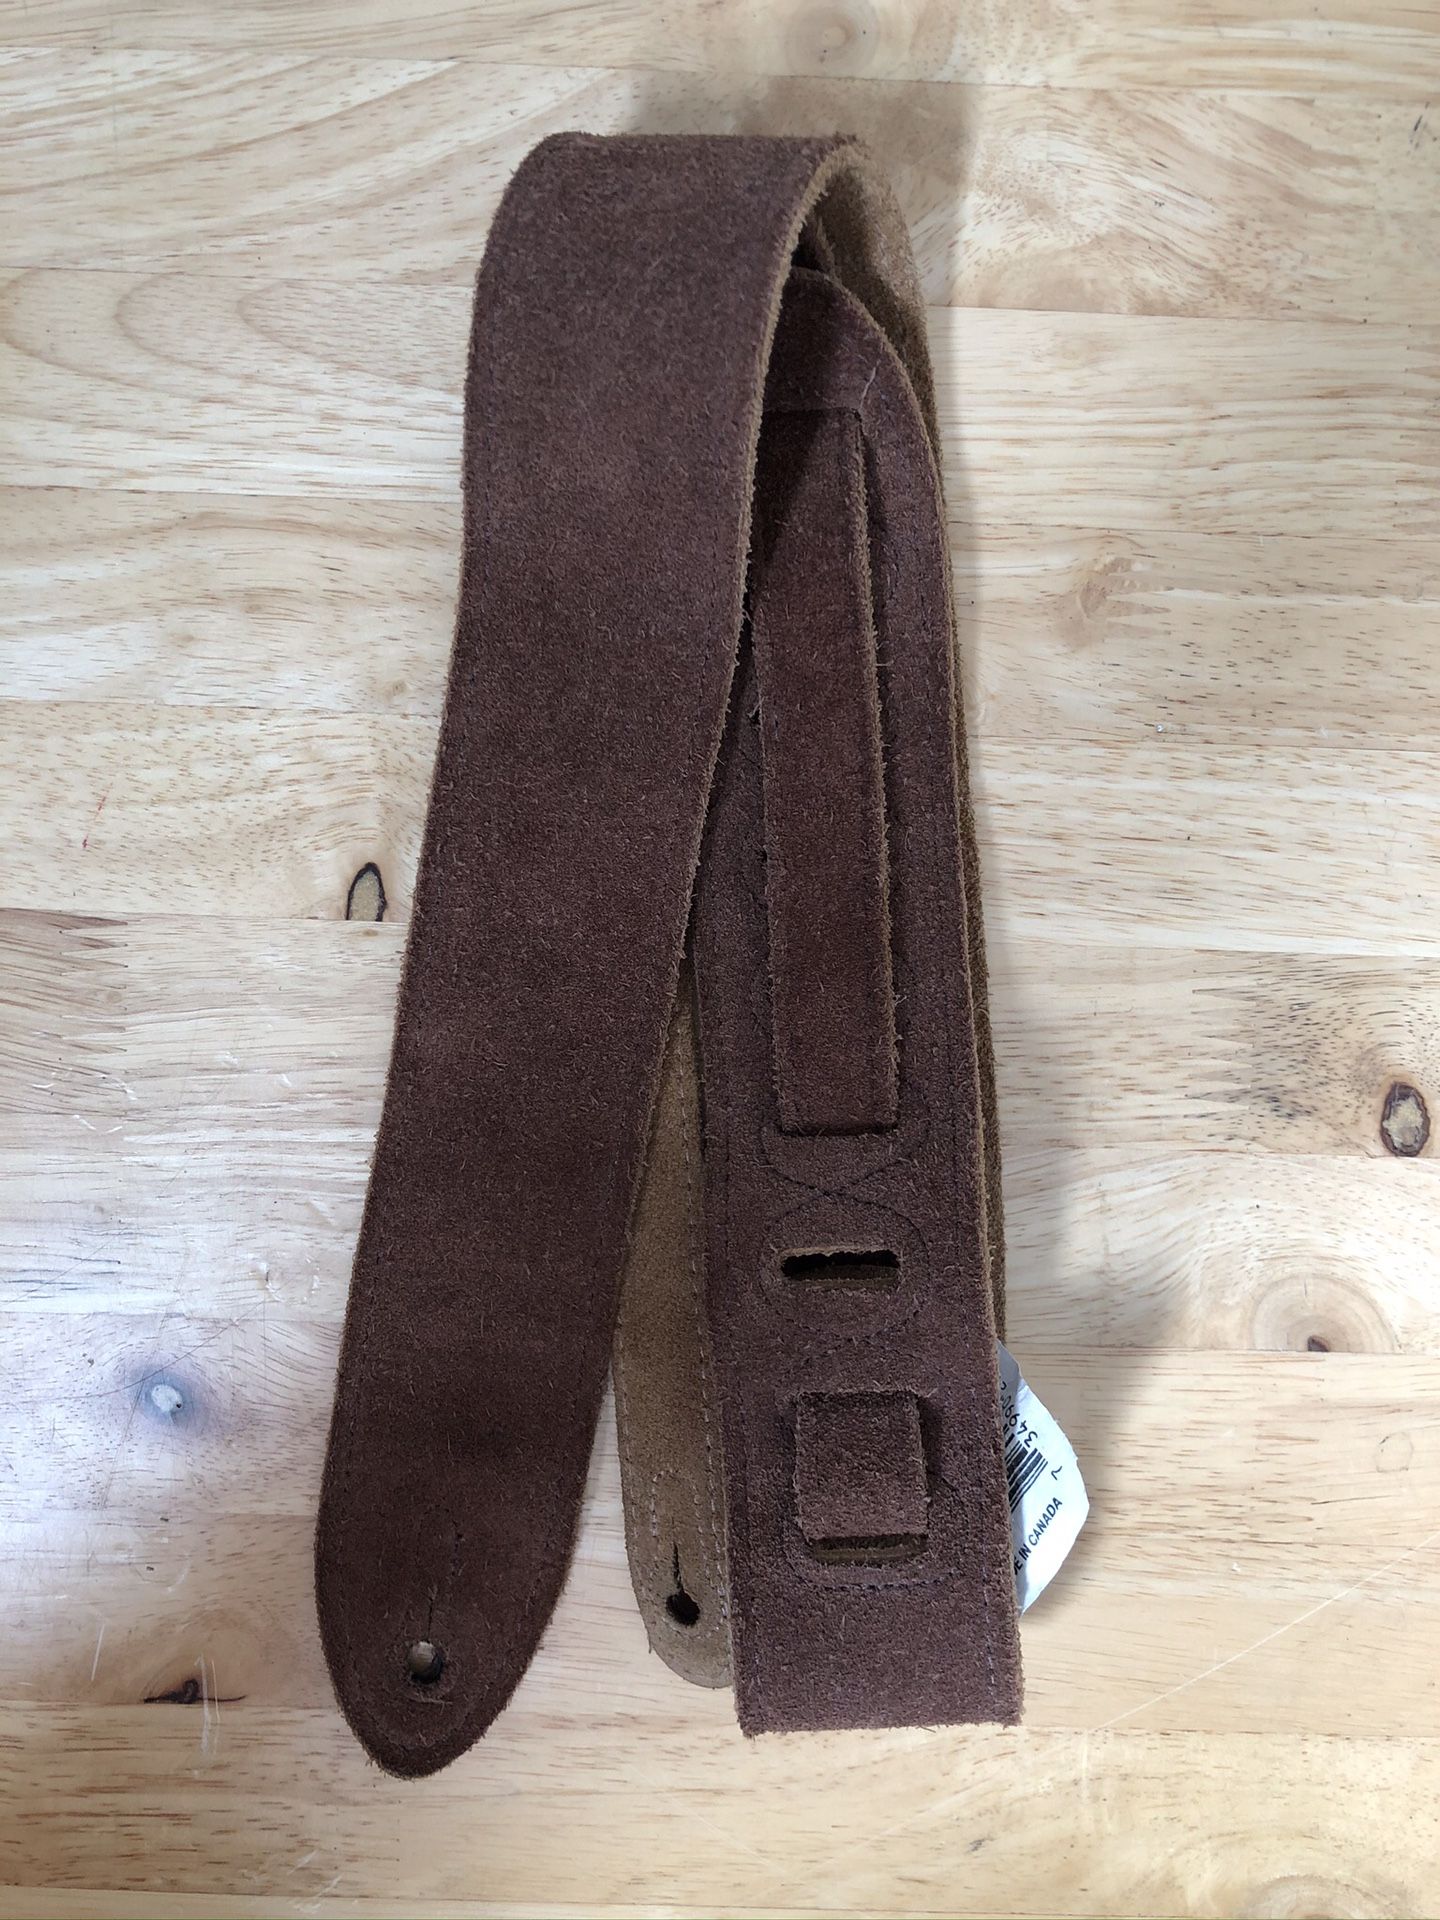 Levy’s 2” Genuine Leather Suede Guitar Strap (brown) NEW never used. Fender, Squier, Ibanez, bass, acoustic, electric, amp, effects